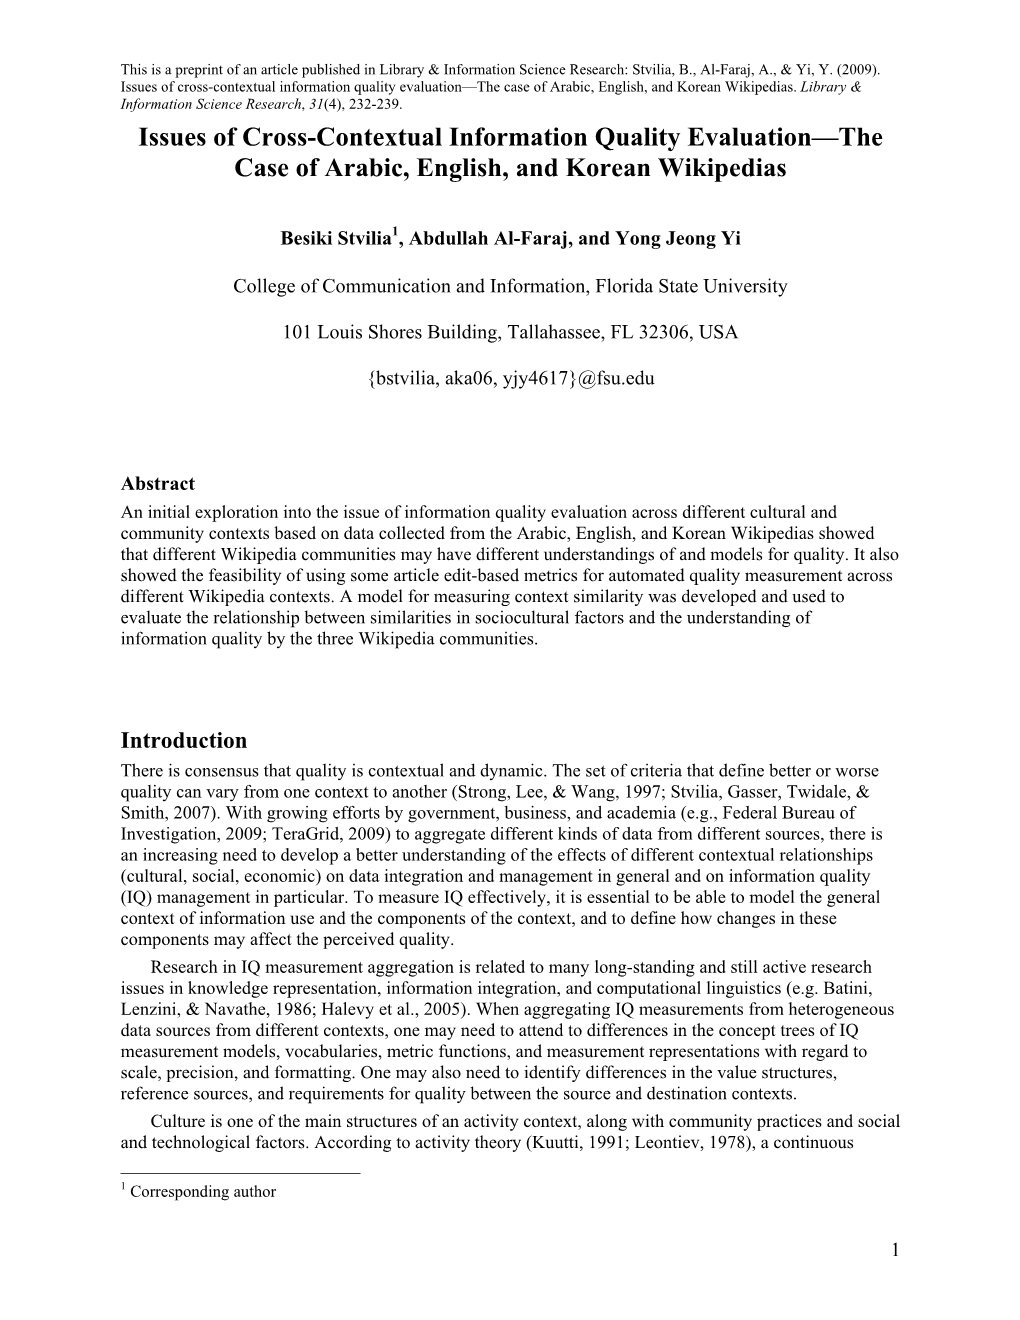 Issues of Cross-Contextual Information Quality Evaluation—The Case of Arabic, English, and Korean Wikipedias